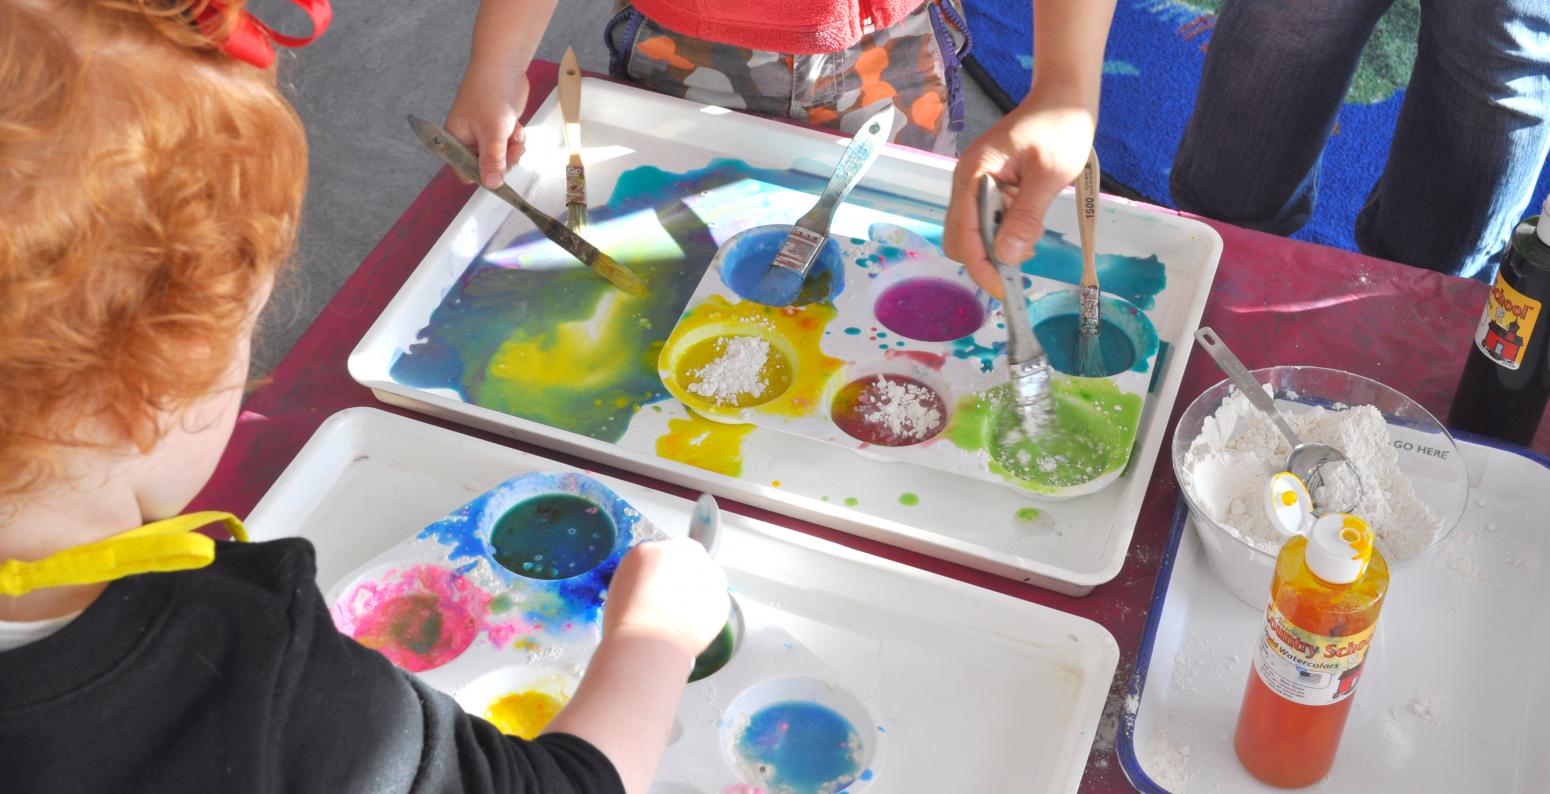 Young painters dipping brushes into colorful palettes.